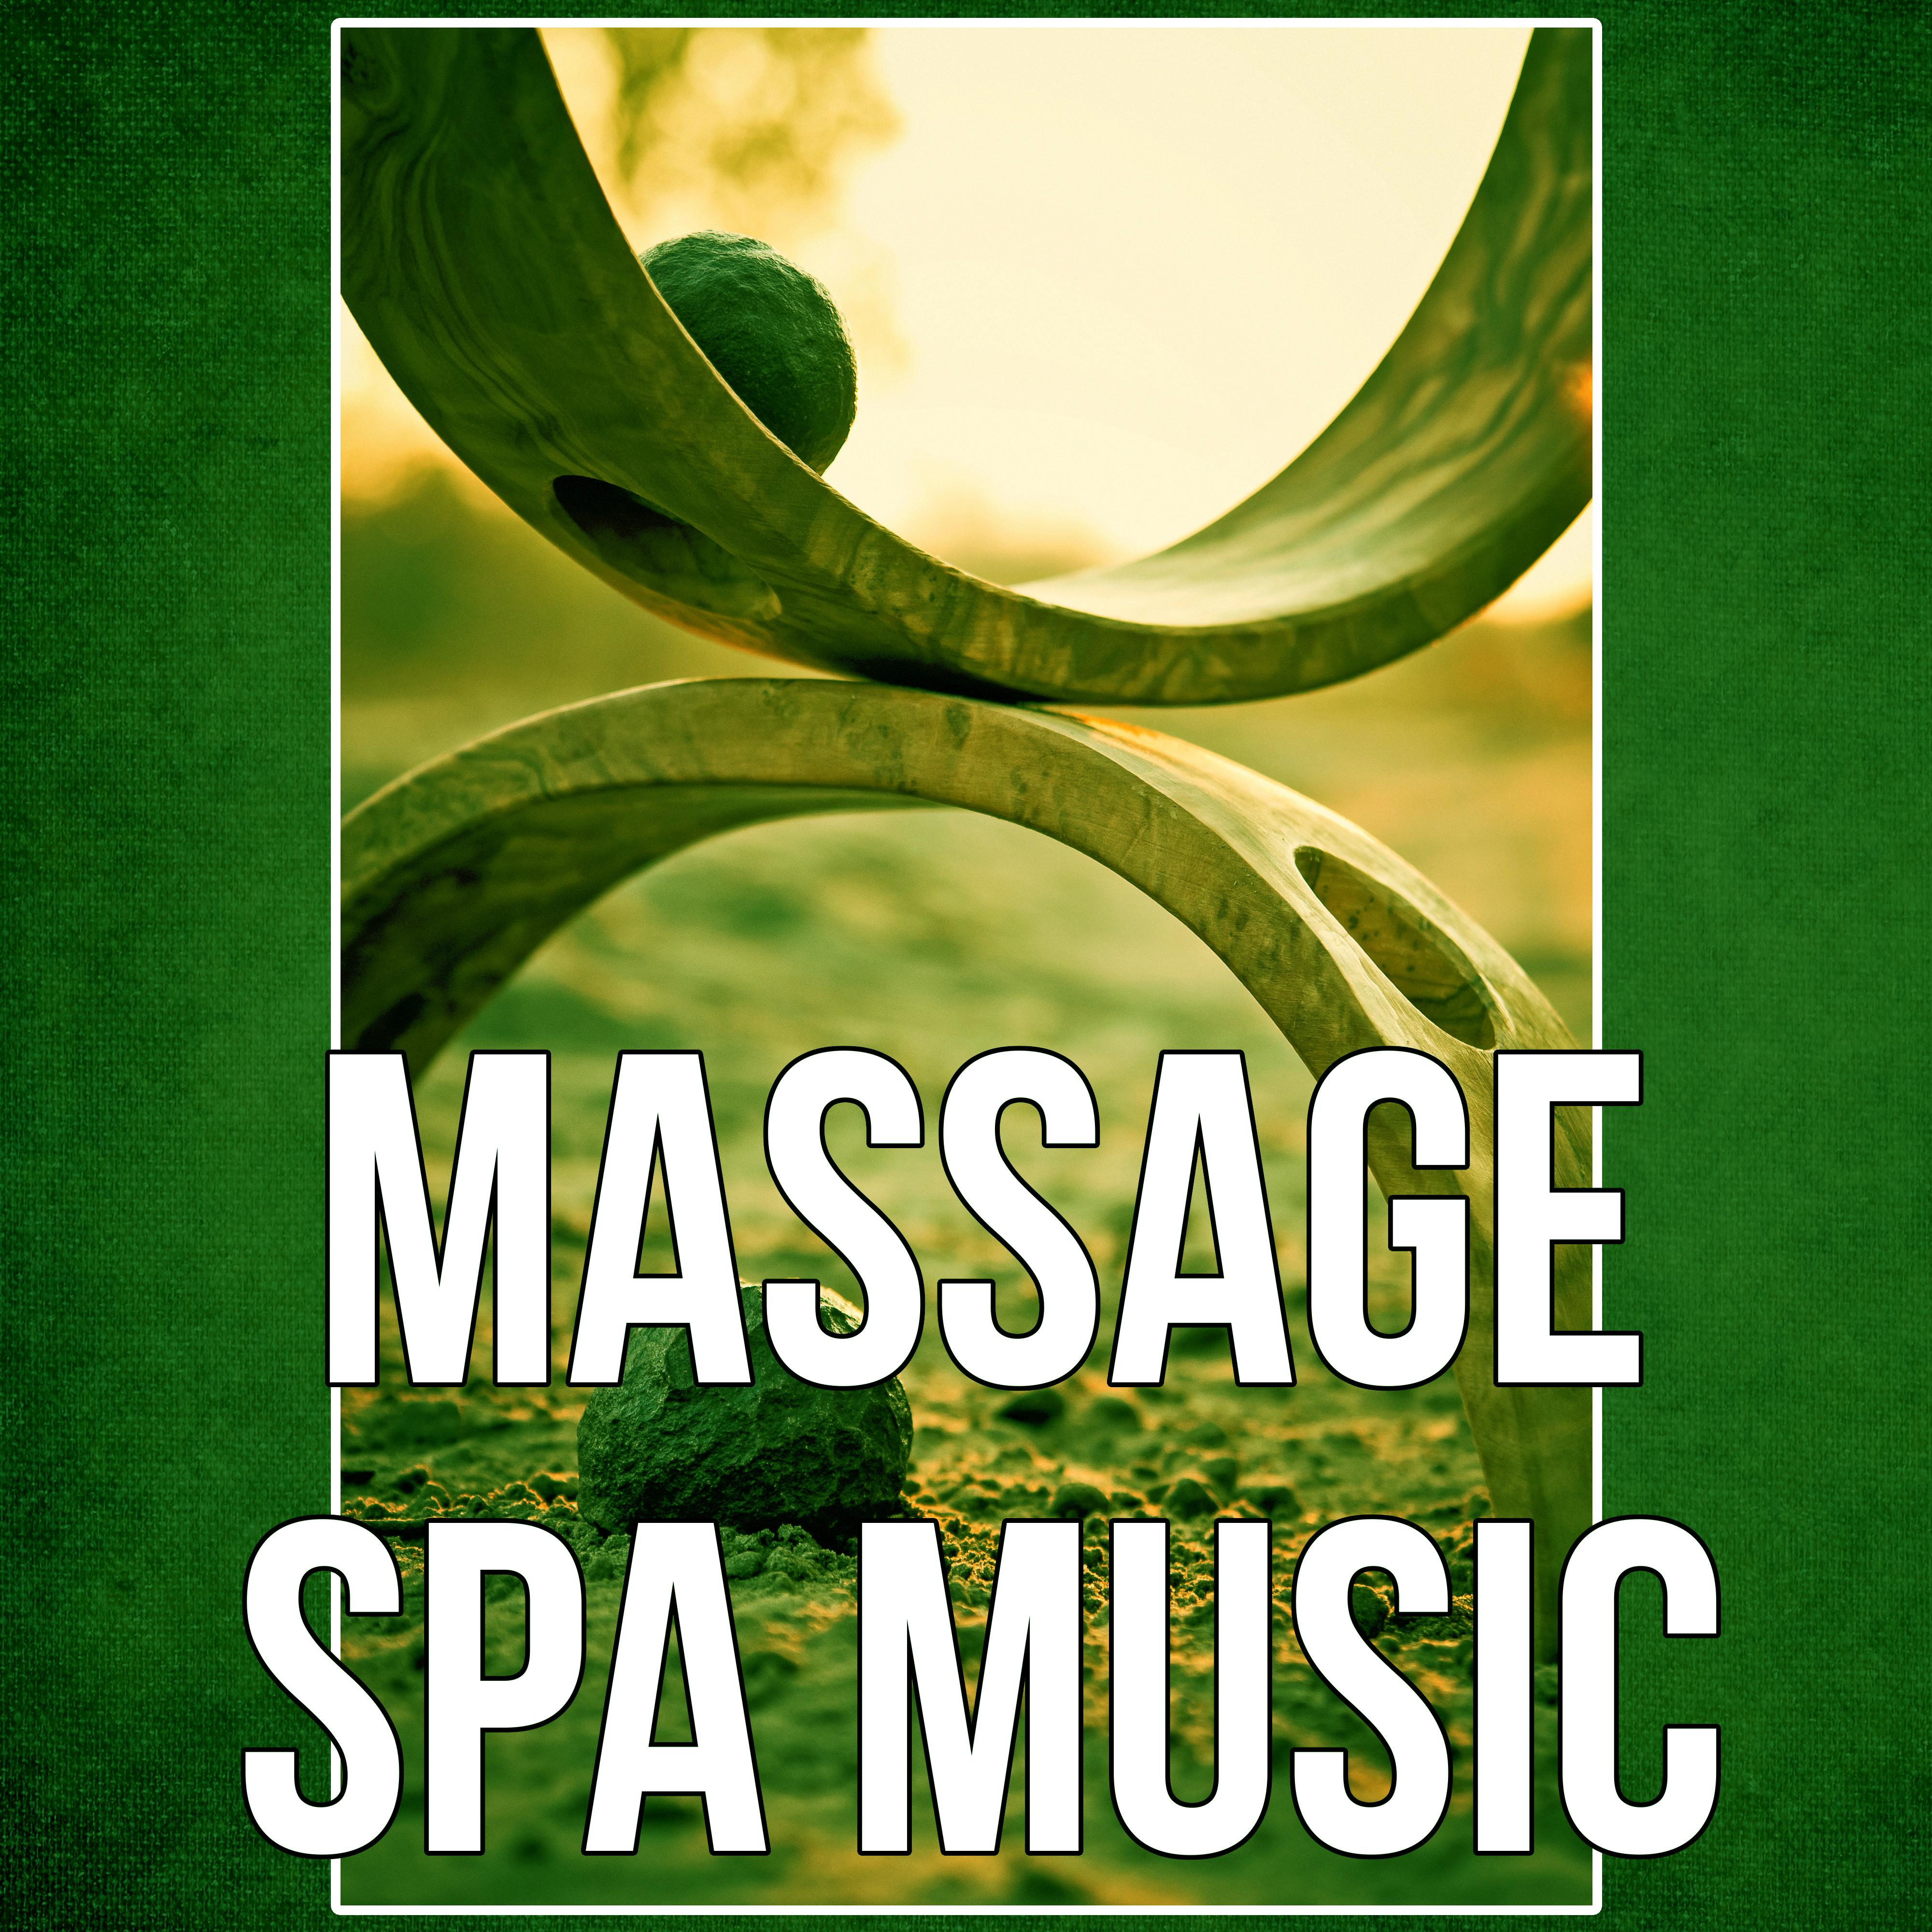 Massage Spa Music - Therapy Music for Relaxation Meditation with Sounds of Nature, Ocean Waves for Well Being, Water & Rain Sounds